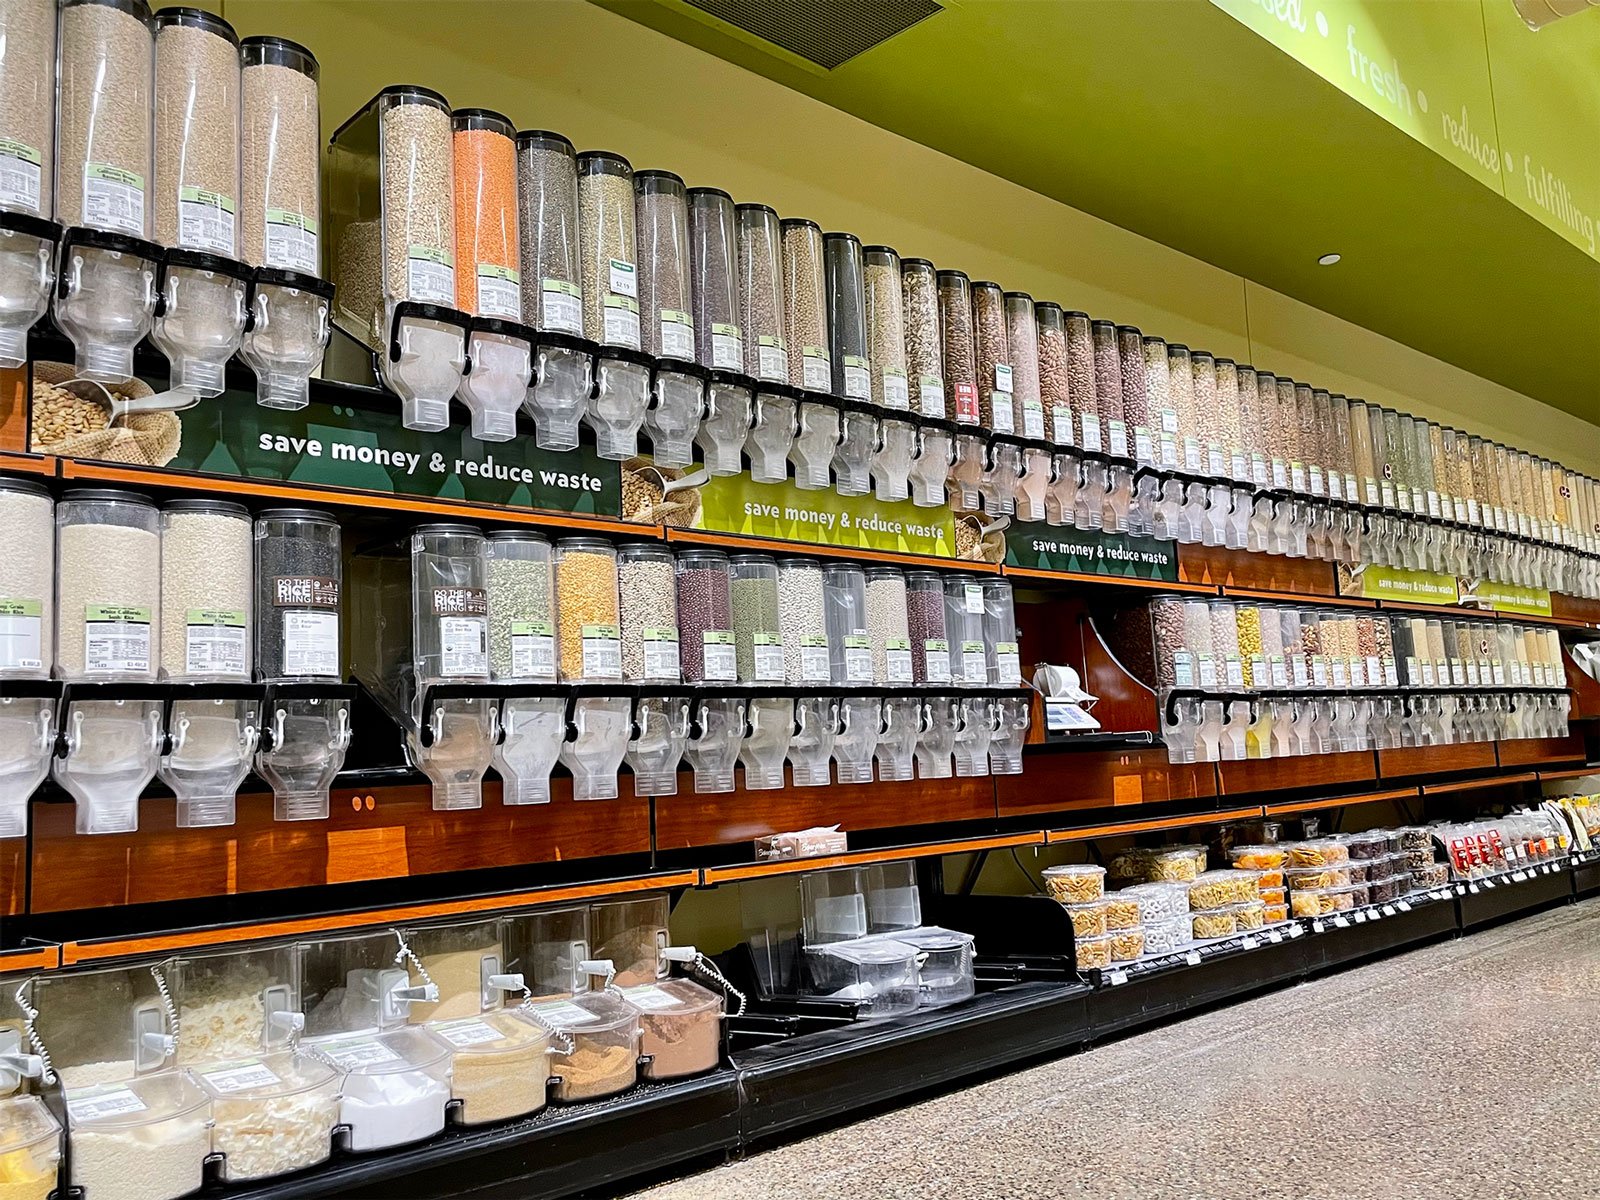   Our bulk section at PFC is stocked with a wide range of products, from dry goods (grains, flours, flour alternatives, beans, nuts, rice) to syrups, nut butters, soaps, oils, and more.  